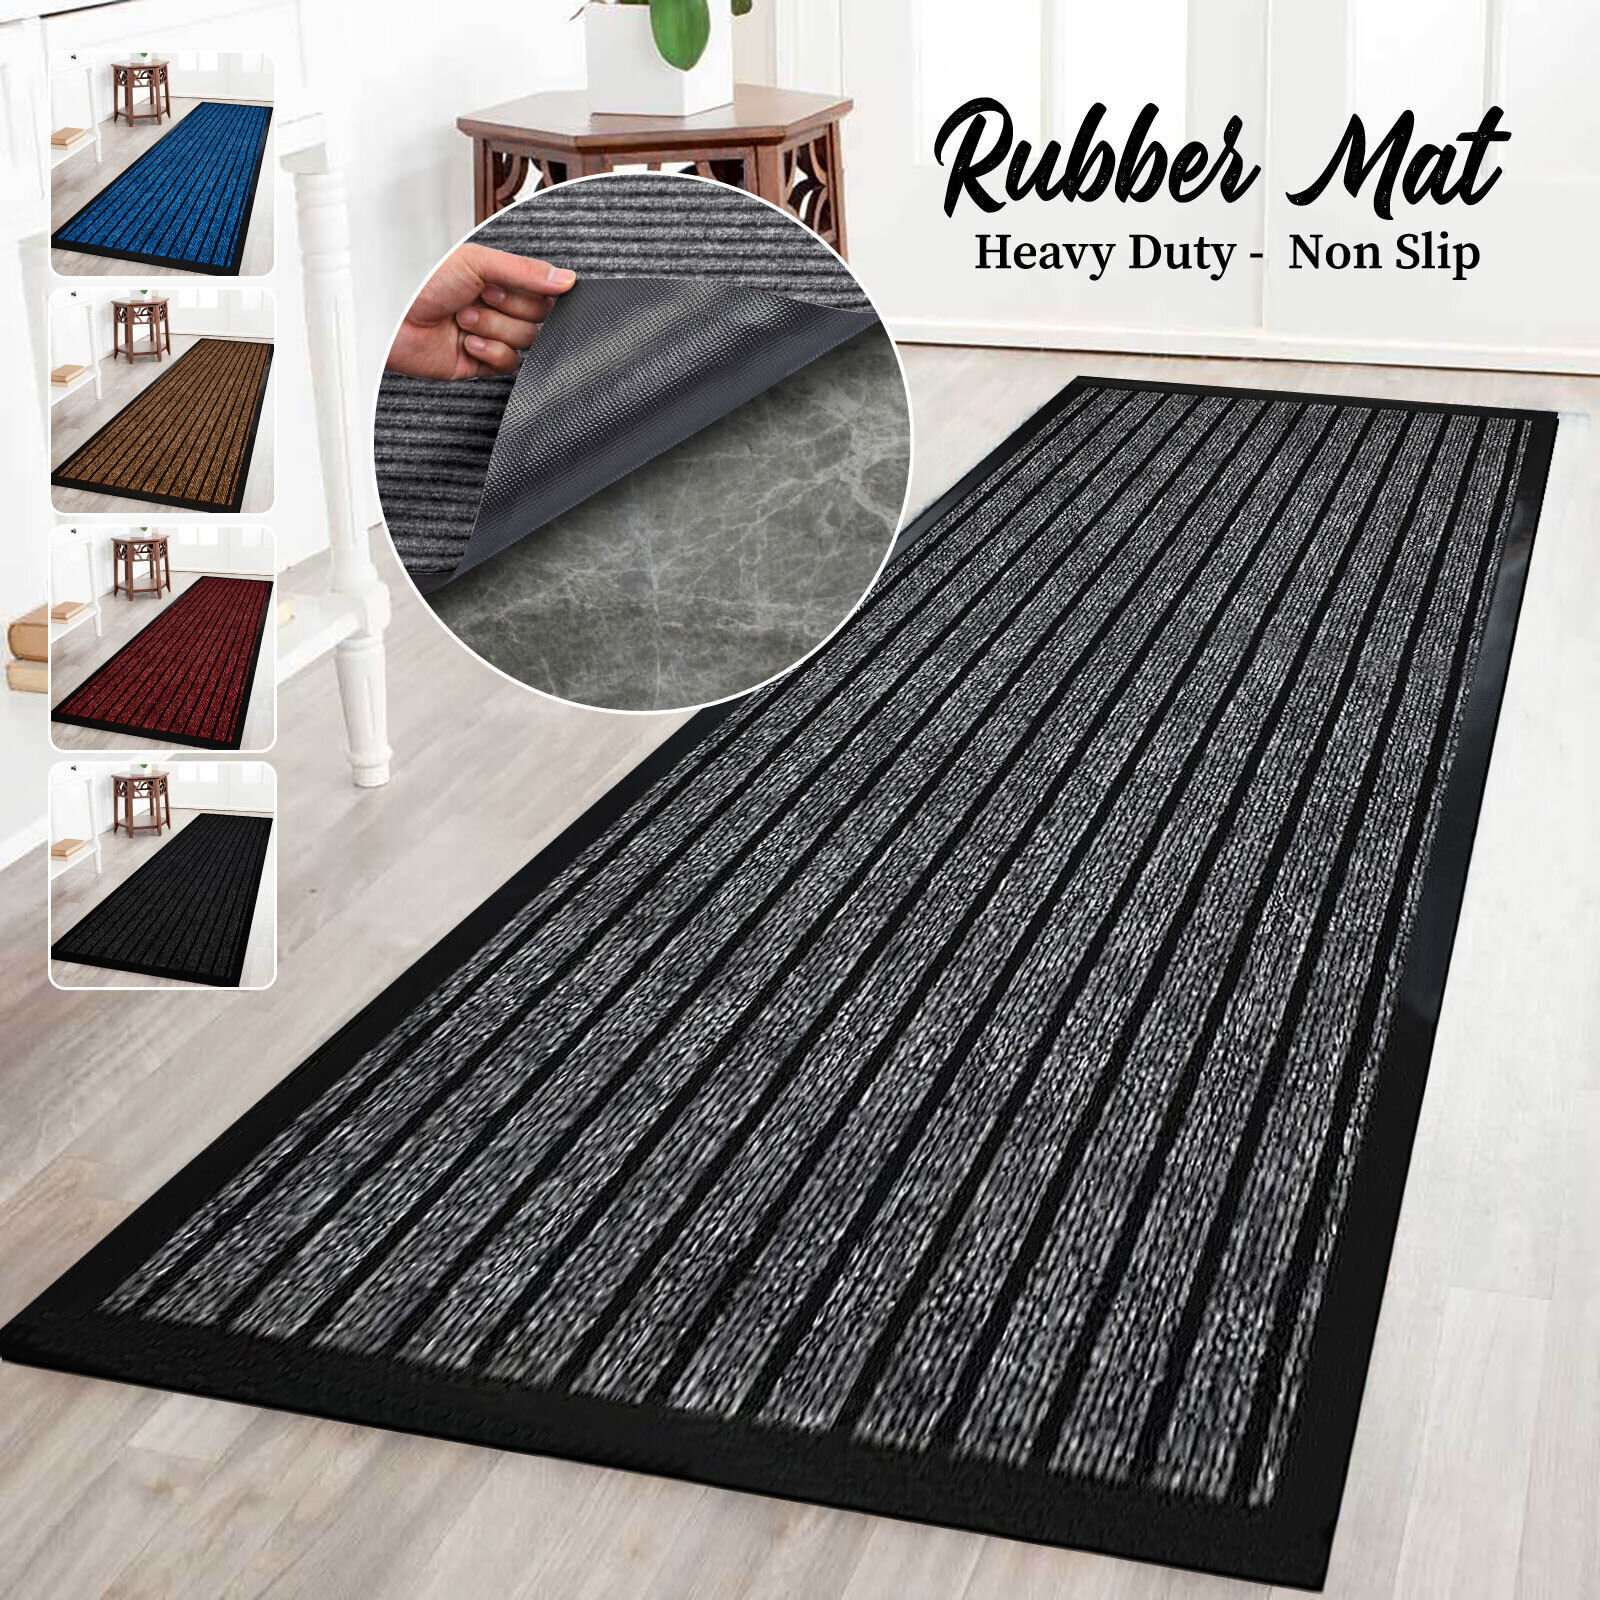 Black And White Striped Outdoor Rug Front Porch Rug Front Door Mat,welcome  Entrance Doormat, Low Pile Indoor Outdoor Entrance Mat For High Traffic  Area, Non-slip Bathroom Mat Carpet, Halloween Harvest Festival, Home